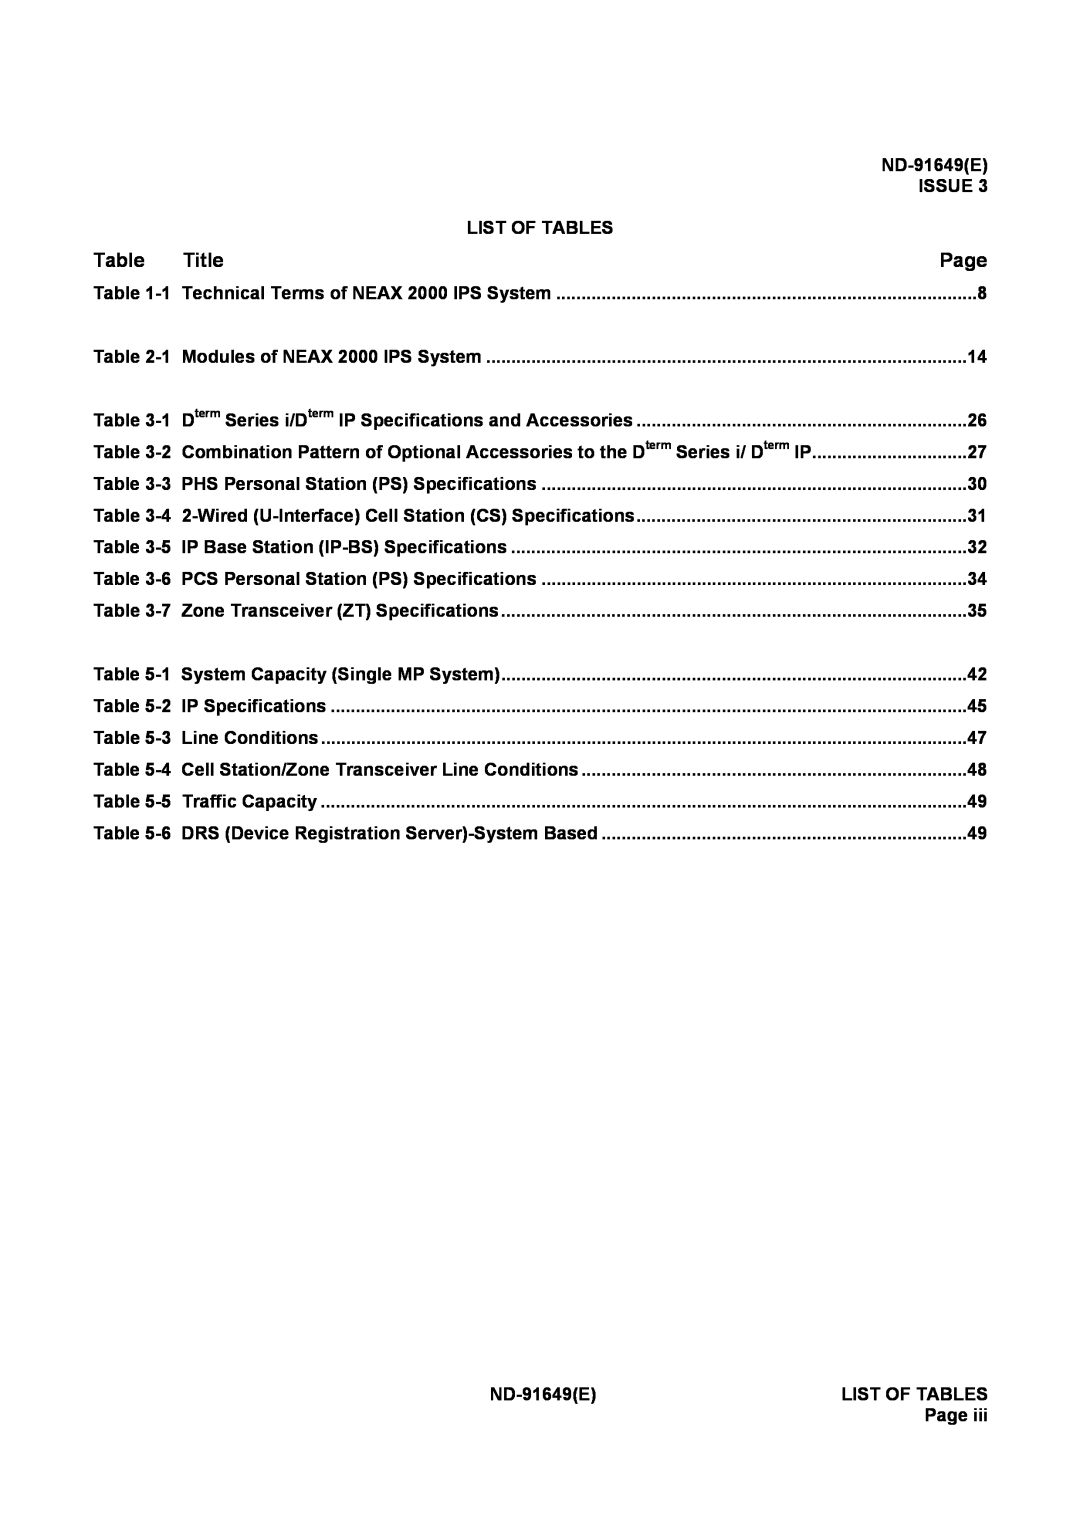 NEC manual Title, Page, ND-91649E, Issue, List Of Tables 